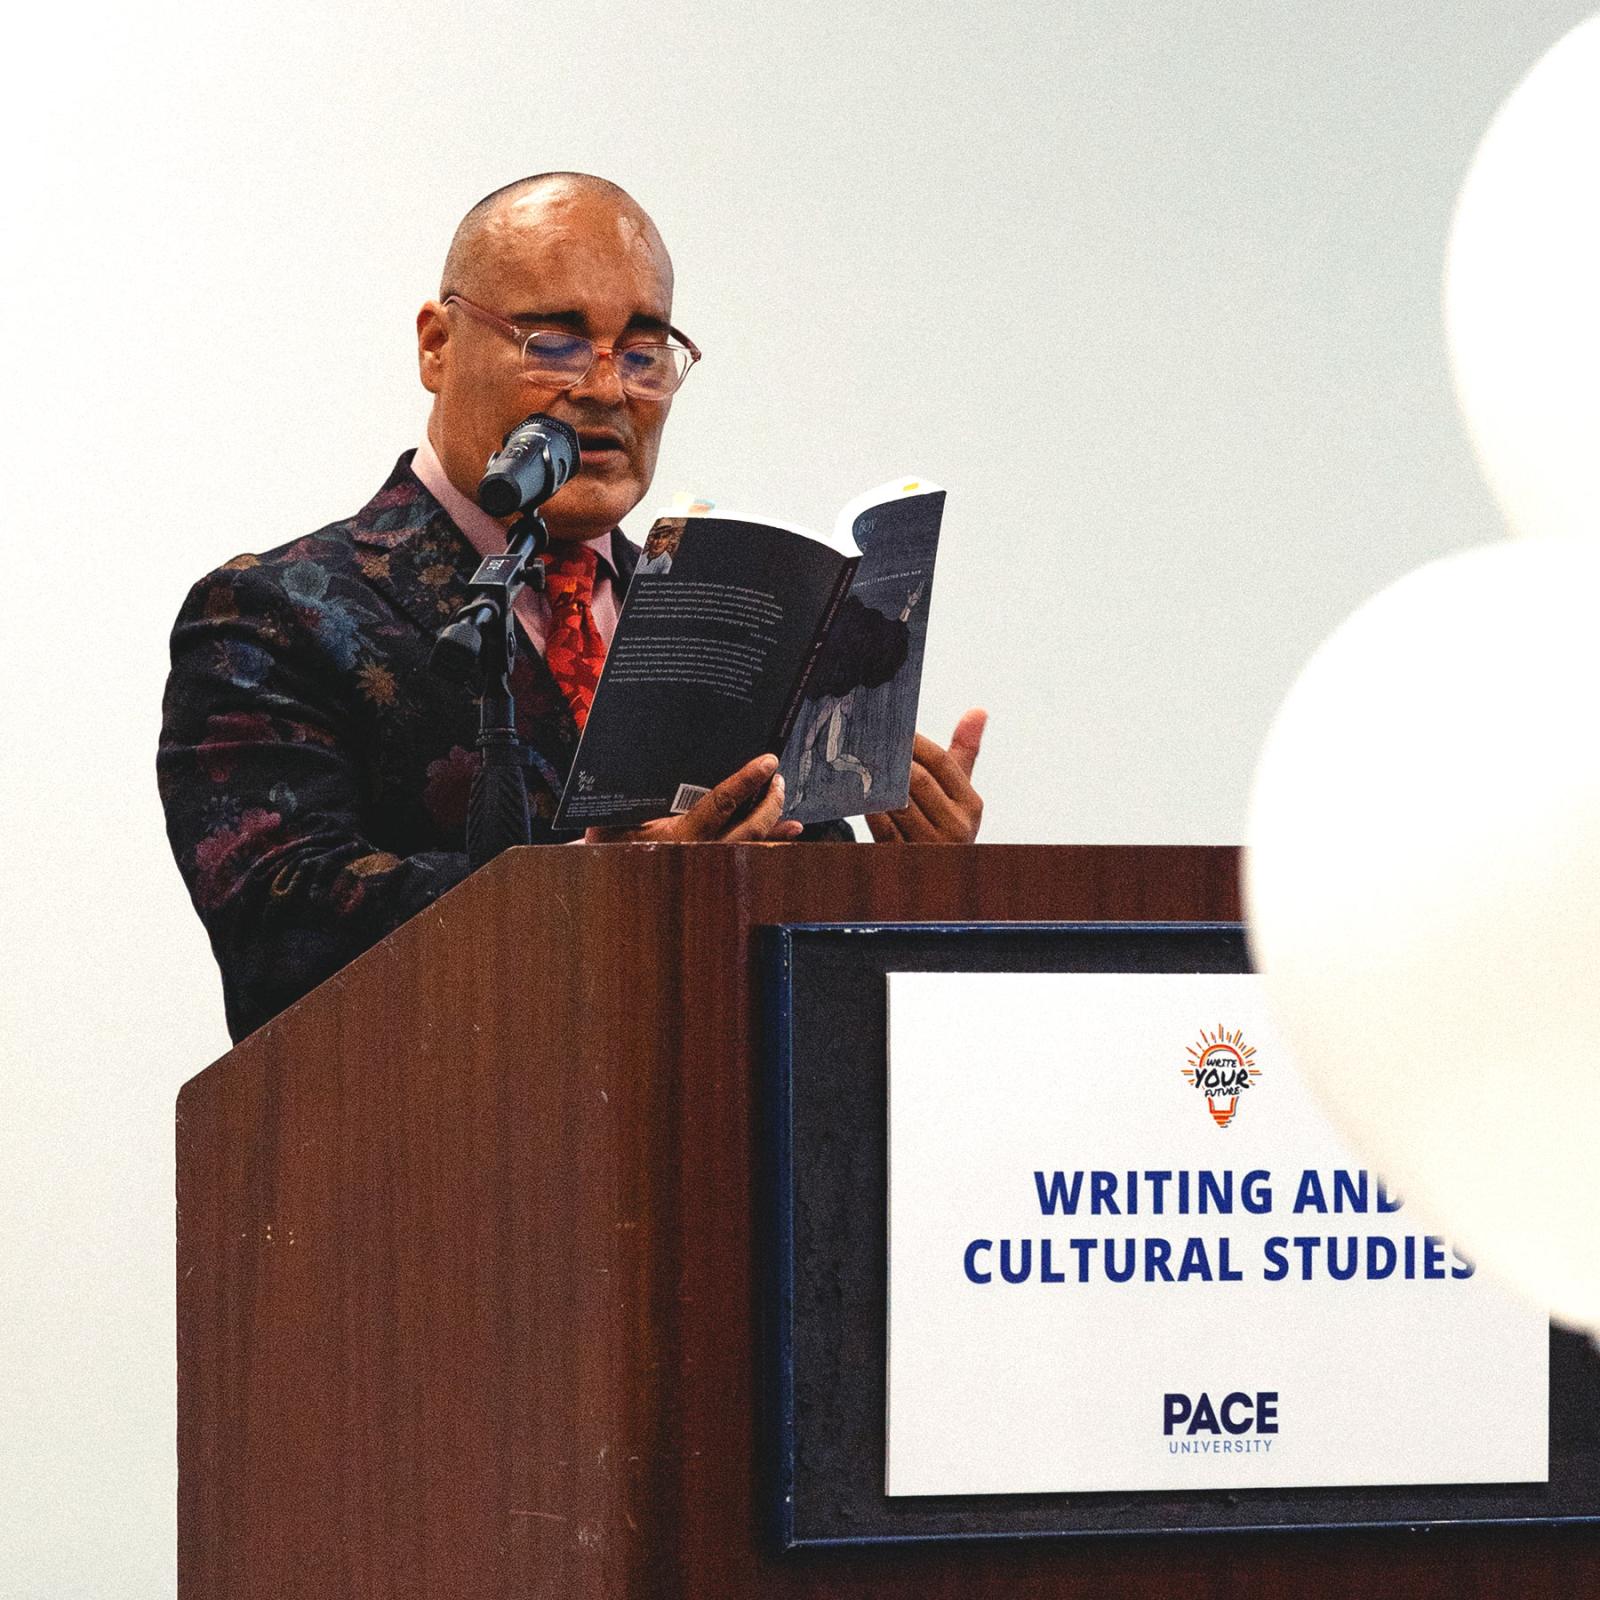 A male reading a book at a podium at an event for the Pace University Writing and Cultural Studies department